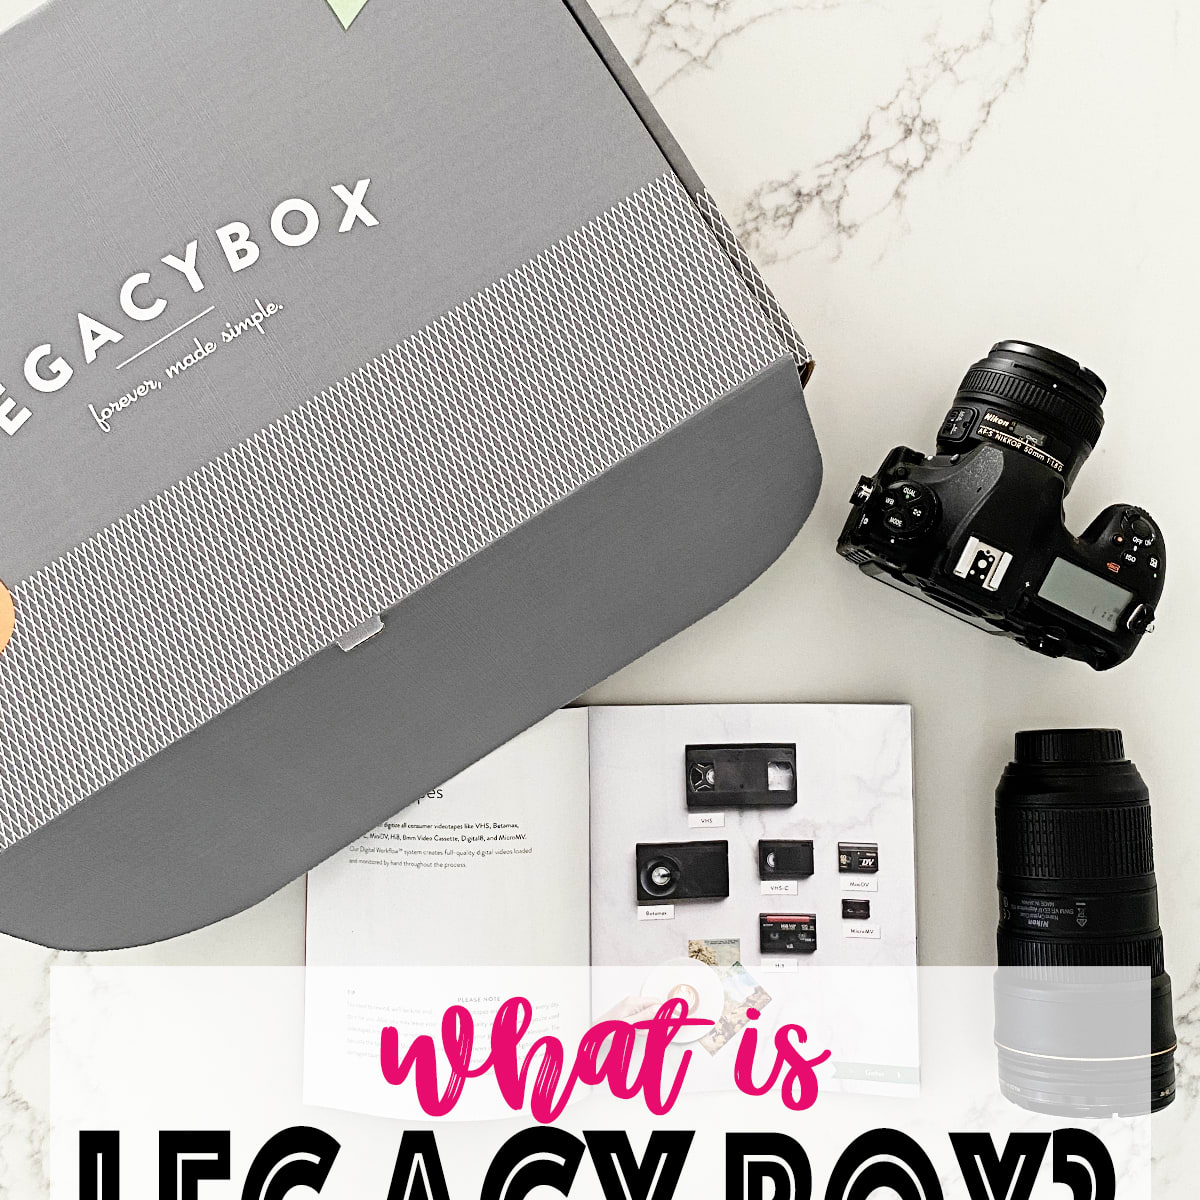 How Do I Know if My Film Is 8mm or 16mm? – Legacybox